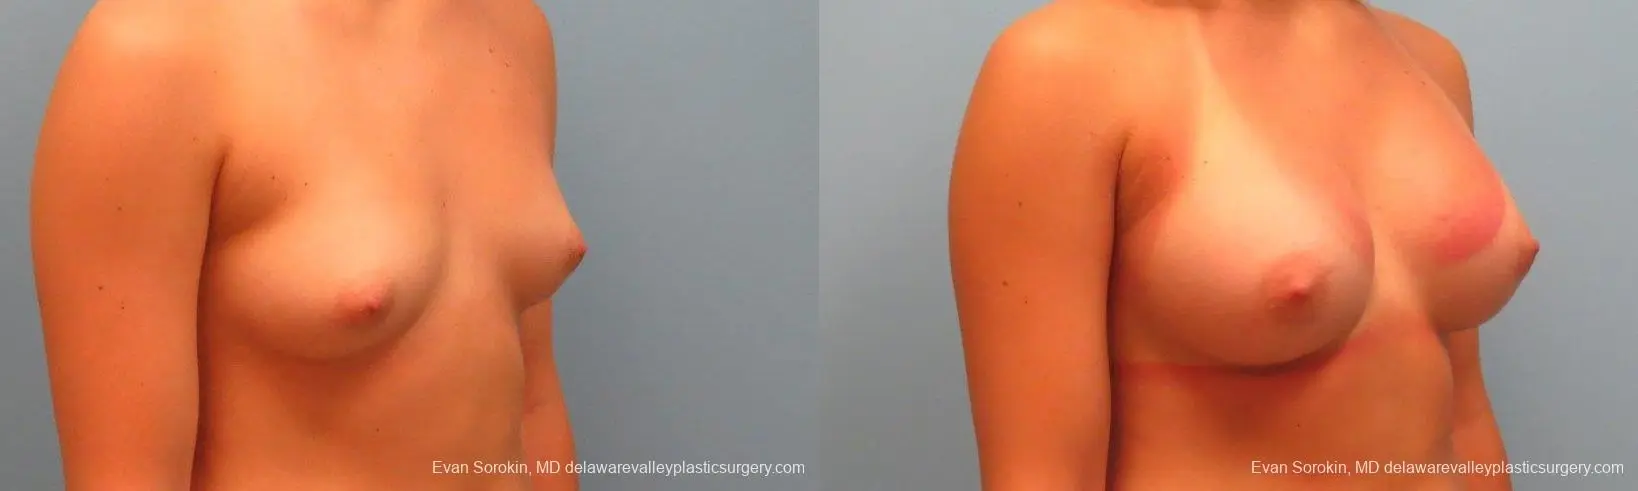 Philadelphia Breast Augmentation 9386 - Before and After 2